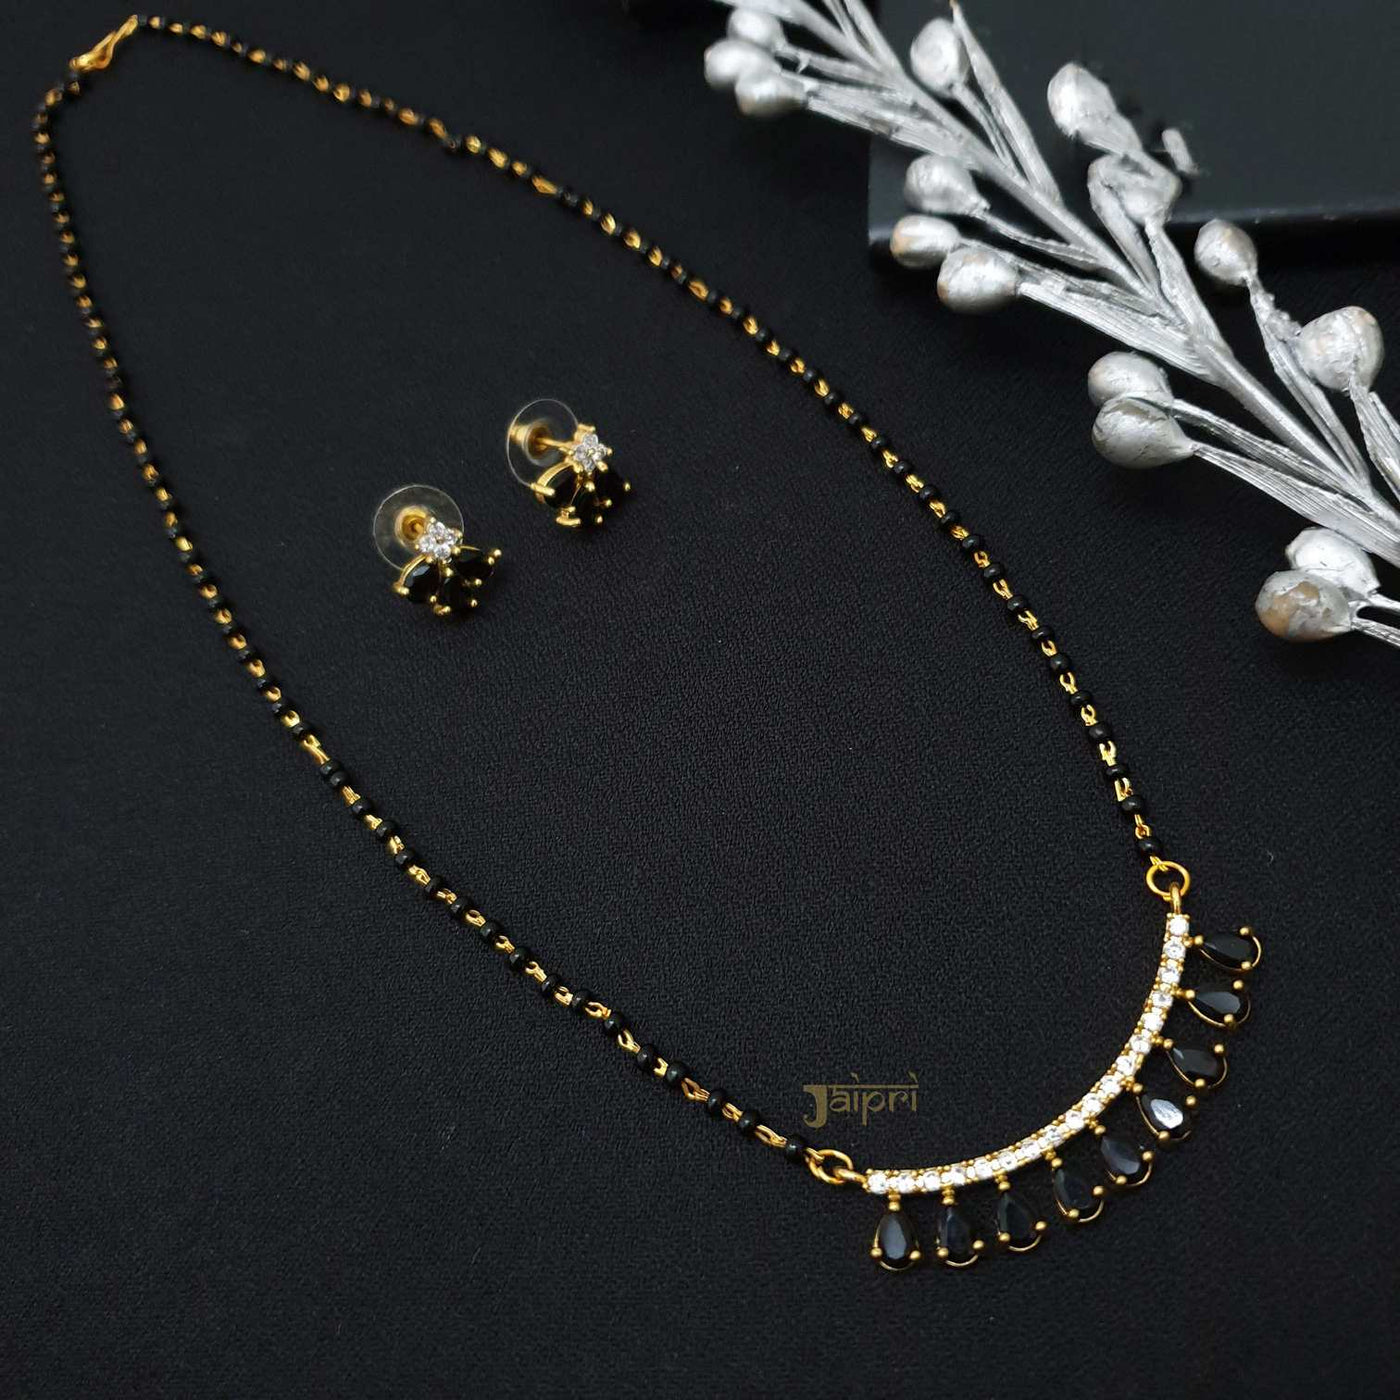 Black & AD Stone Tear-Drop Mangalsutra With Earrings